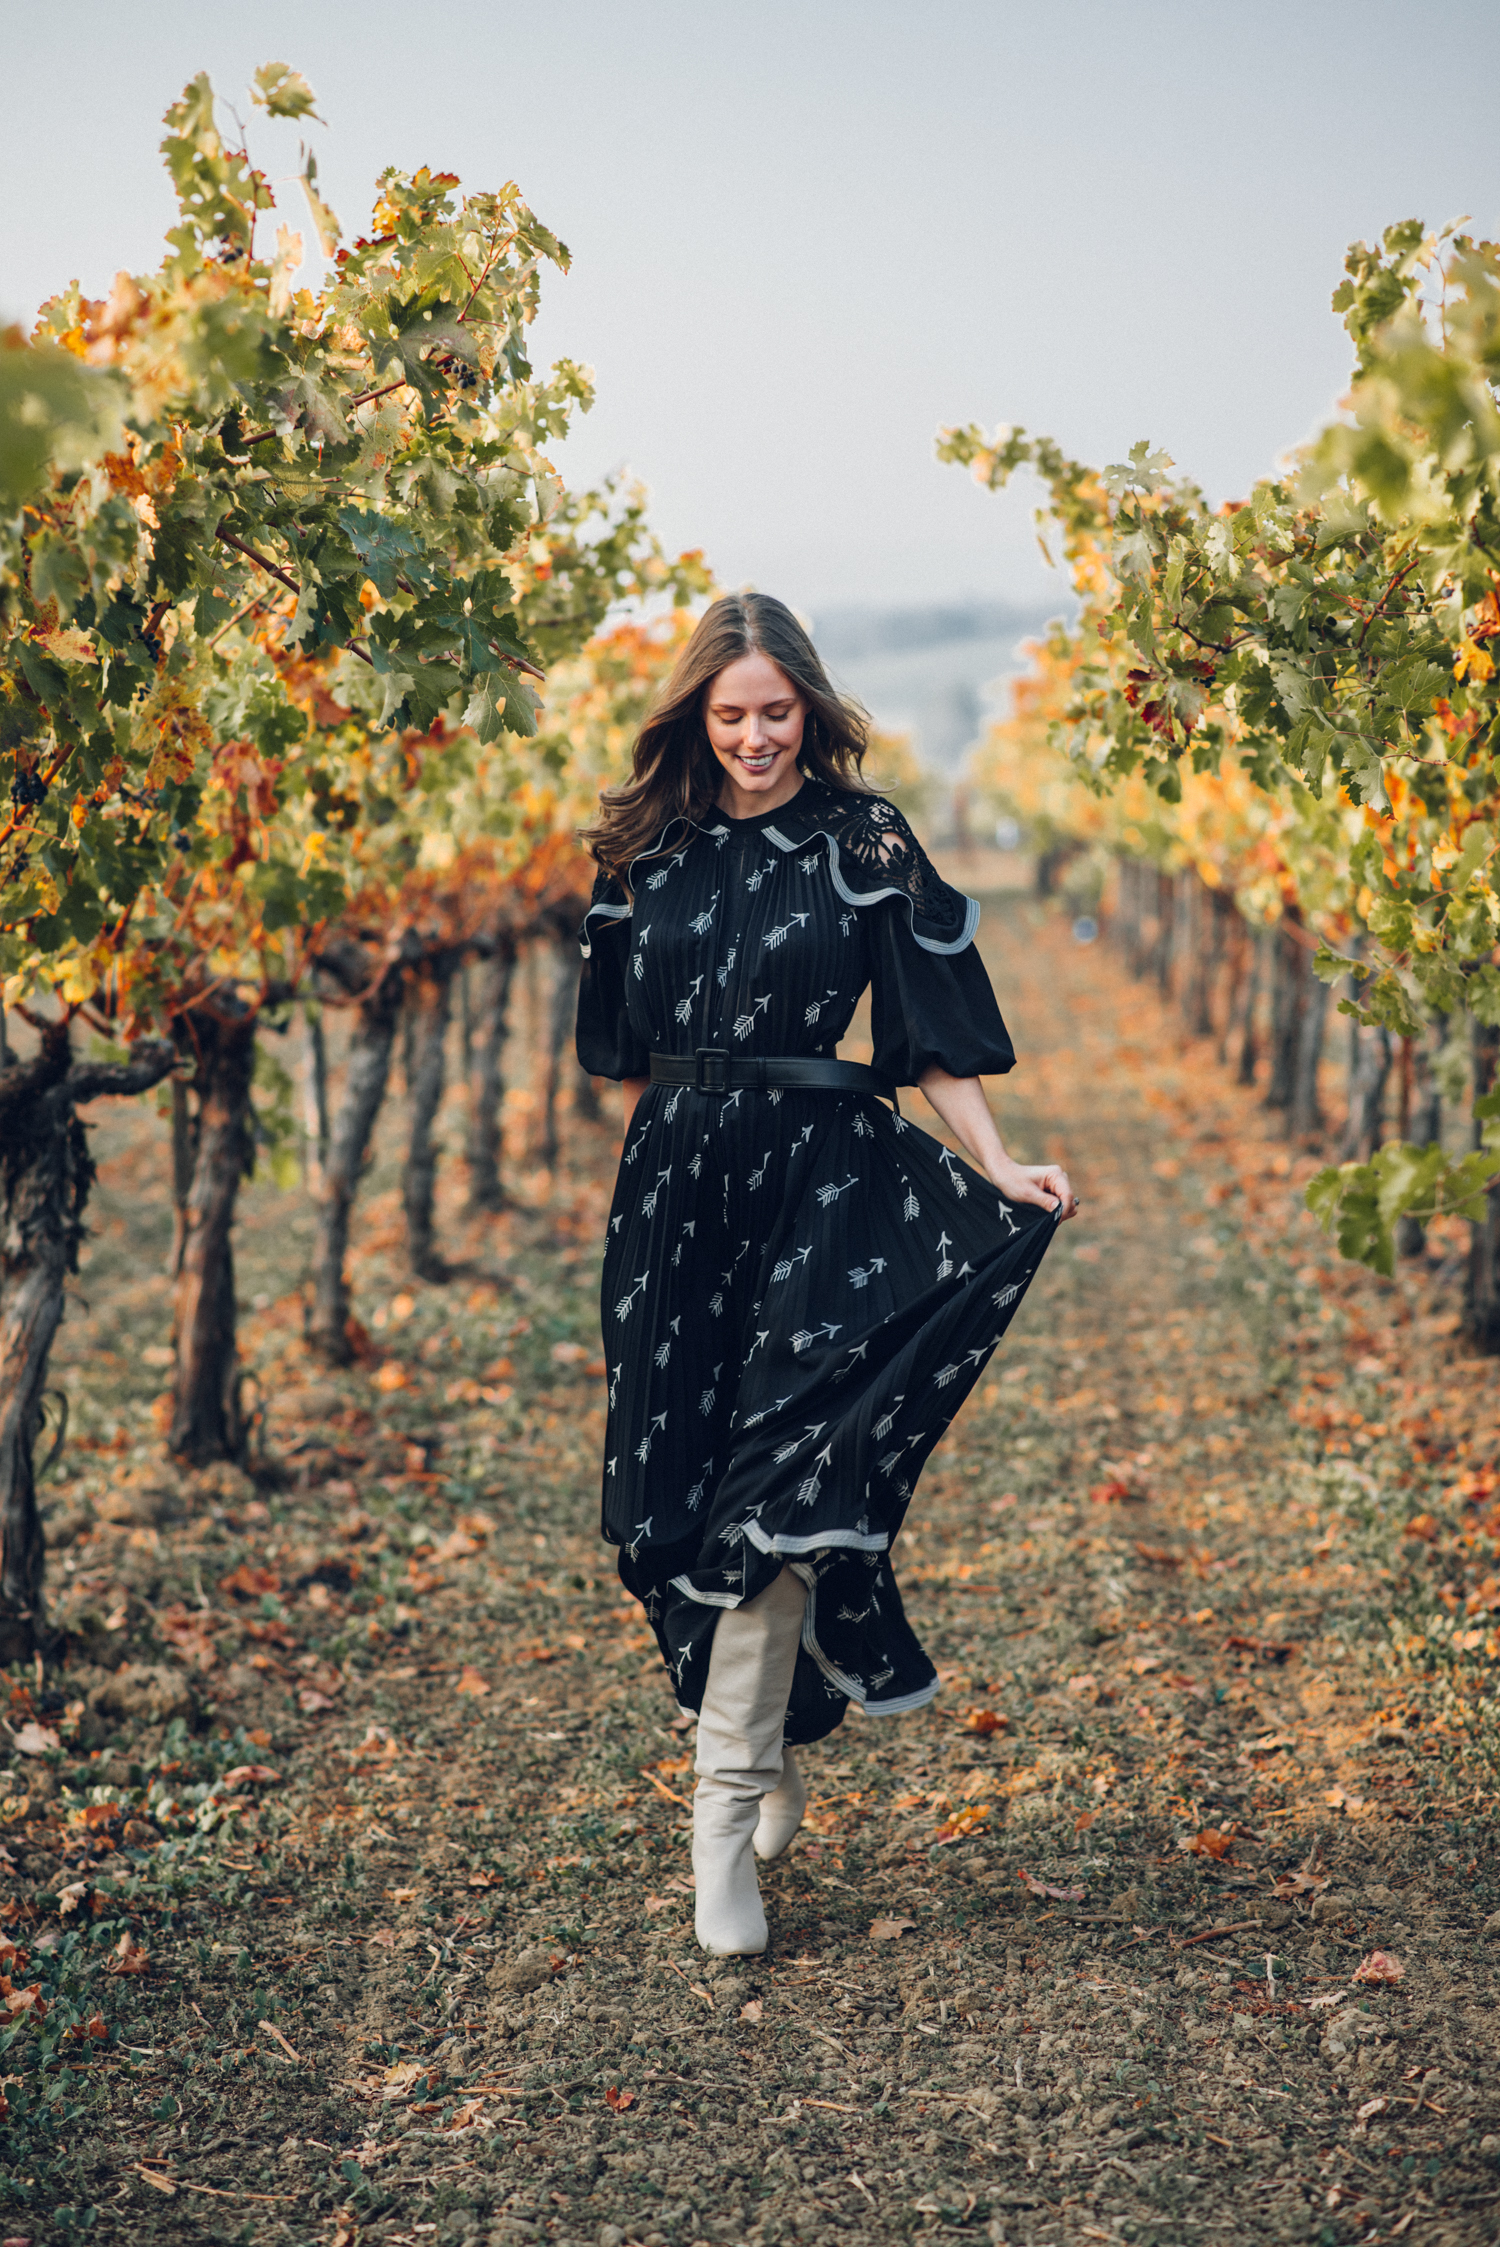 Alyssa Campanella of The A List blog visits Frog's Leap winery for Cabernet season 2018 wearing Self Portrait arrow dress and What For ivory boots